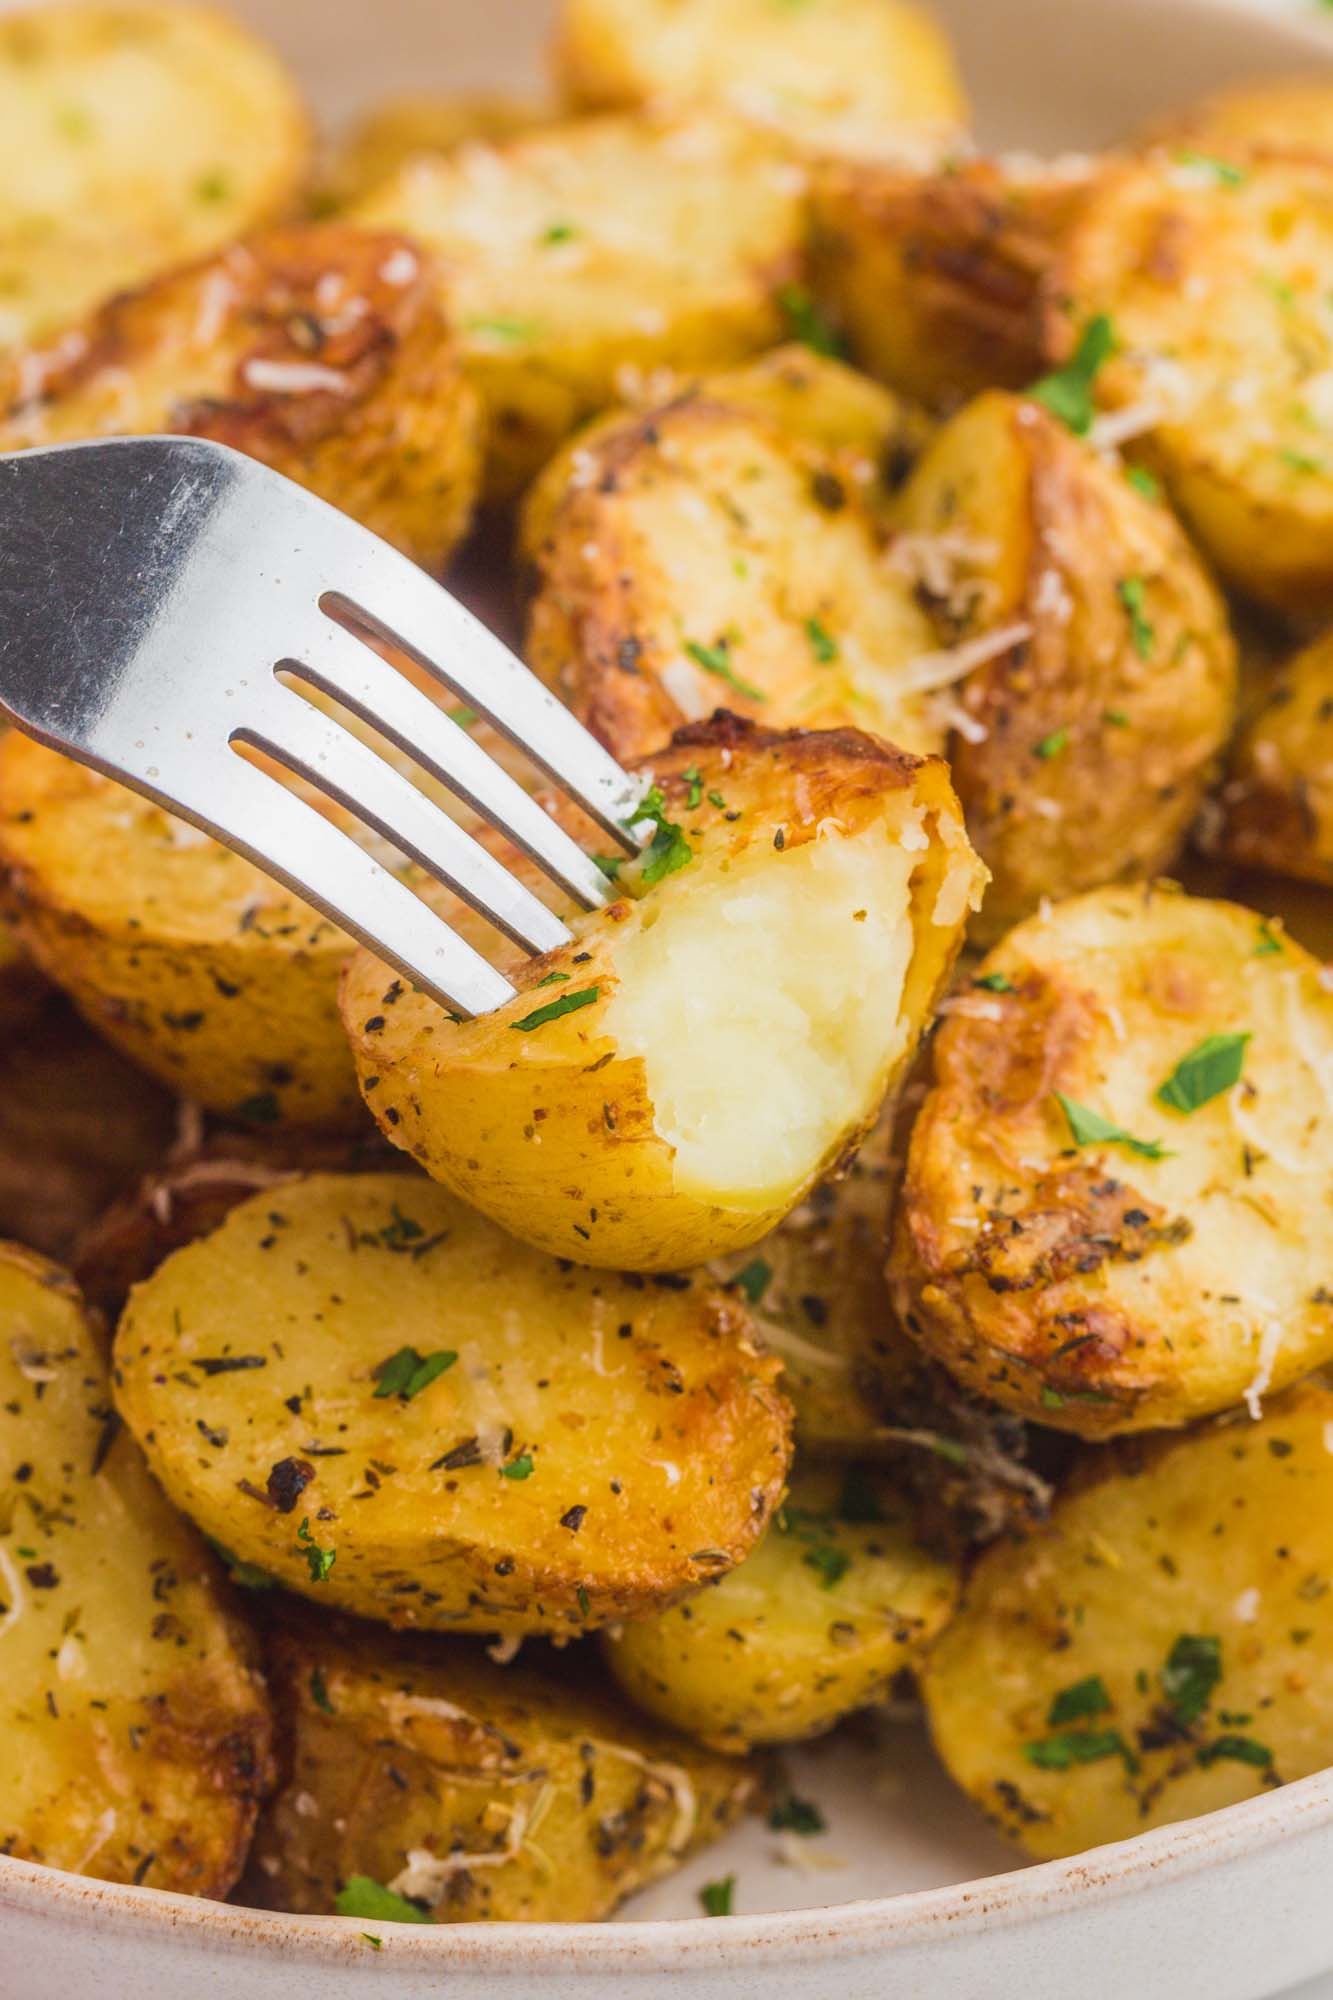 A bite shot of roasted potatoes with a fork